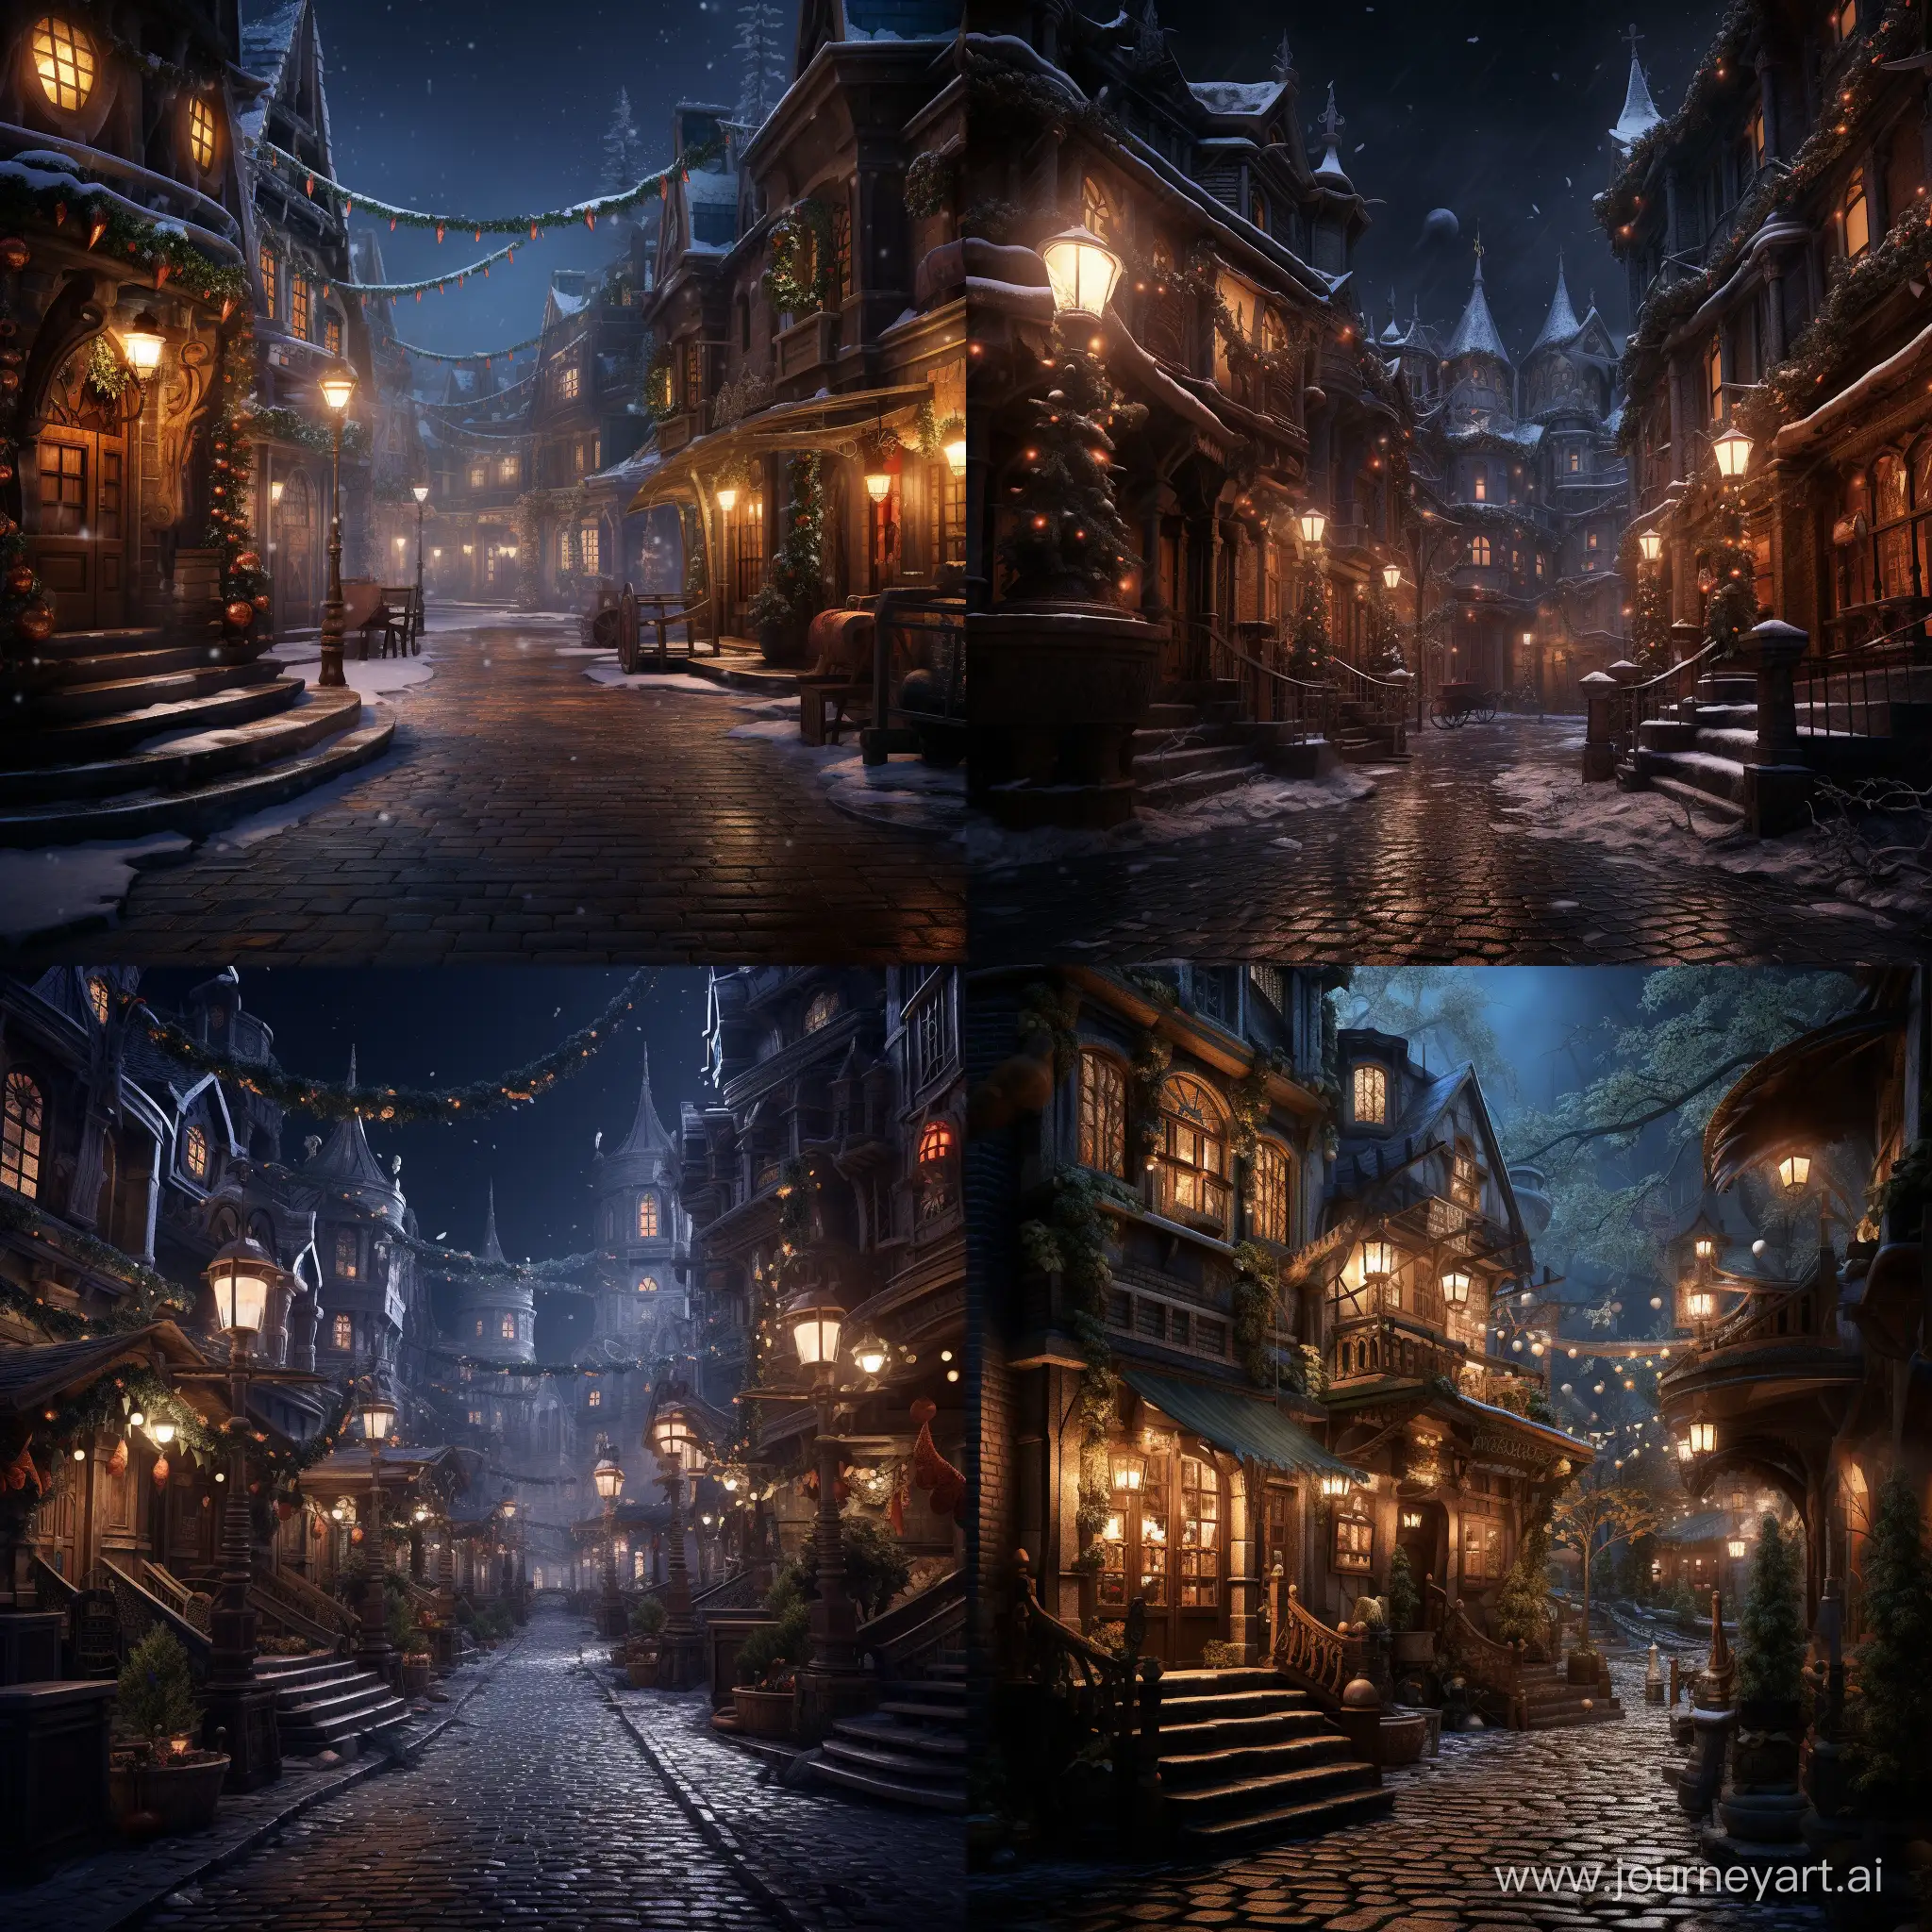 Enchanting-Christmas-Fantasy-Cityscape-with-Elves-and-Dwarves-in-Magical-Late-Medieval-Style